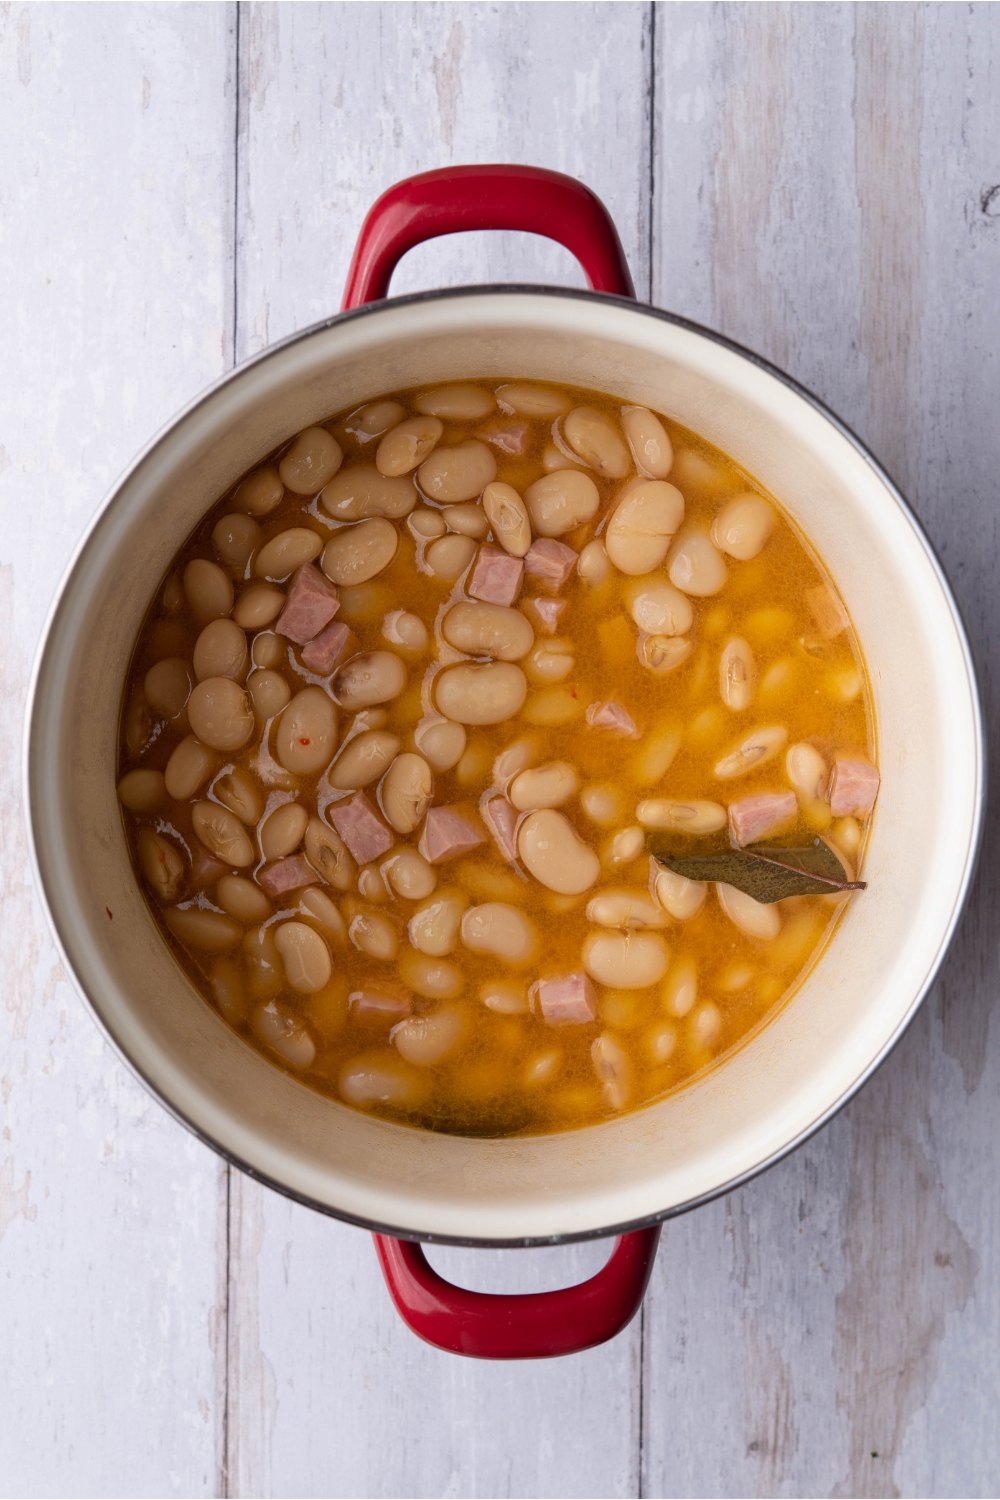 A red sauce pot filled with butter beans, diced ham and bay leaves in a seasoned broth.